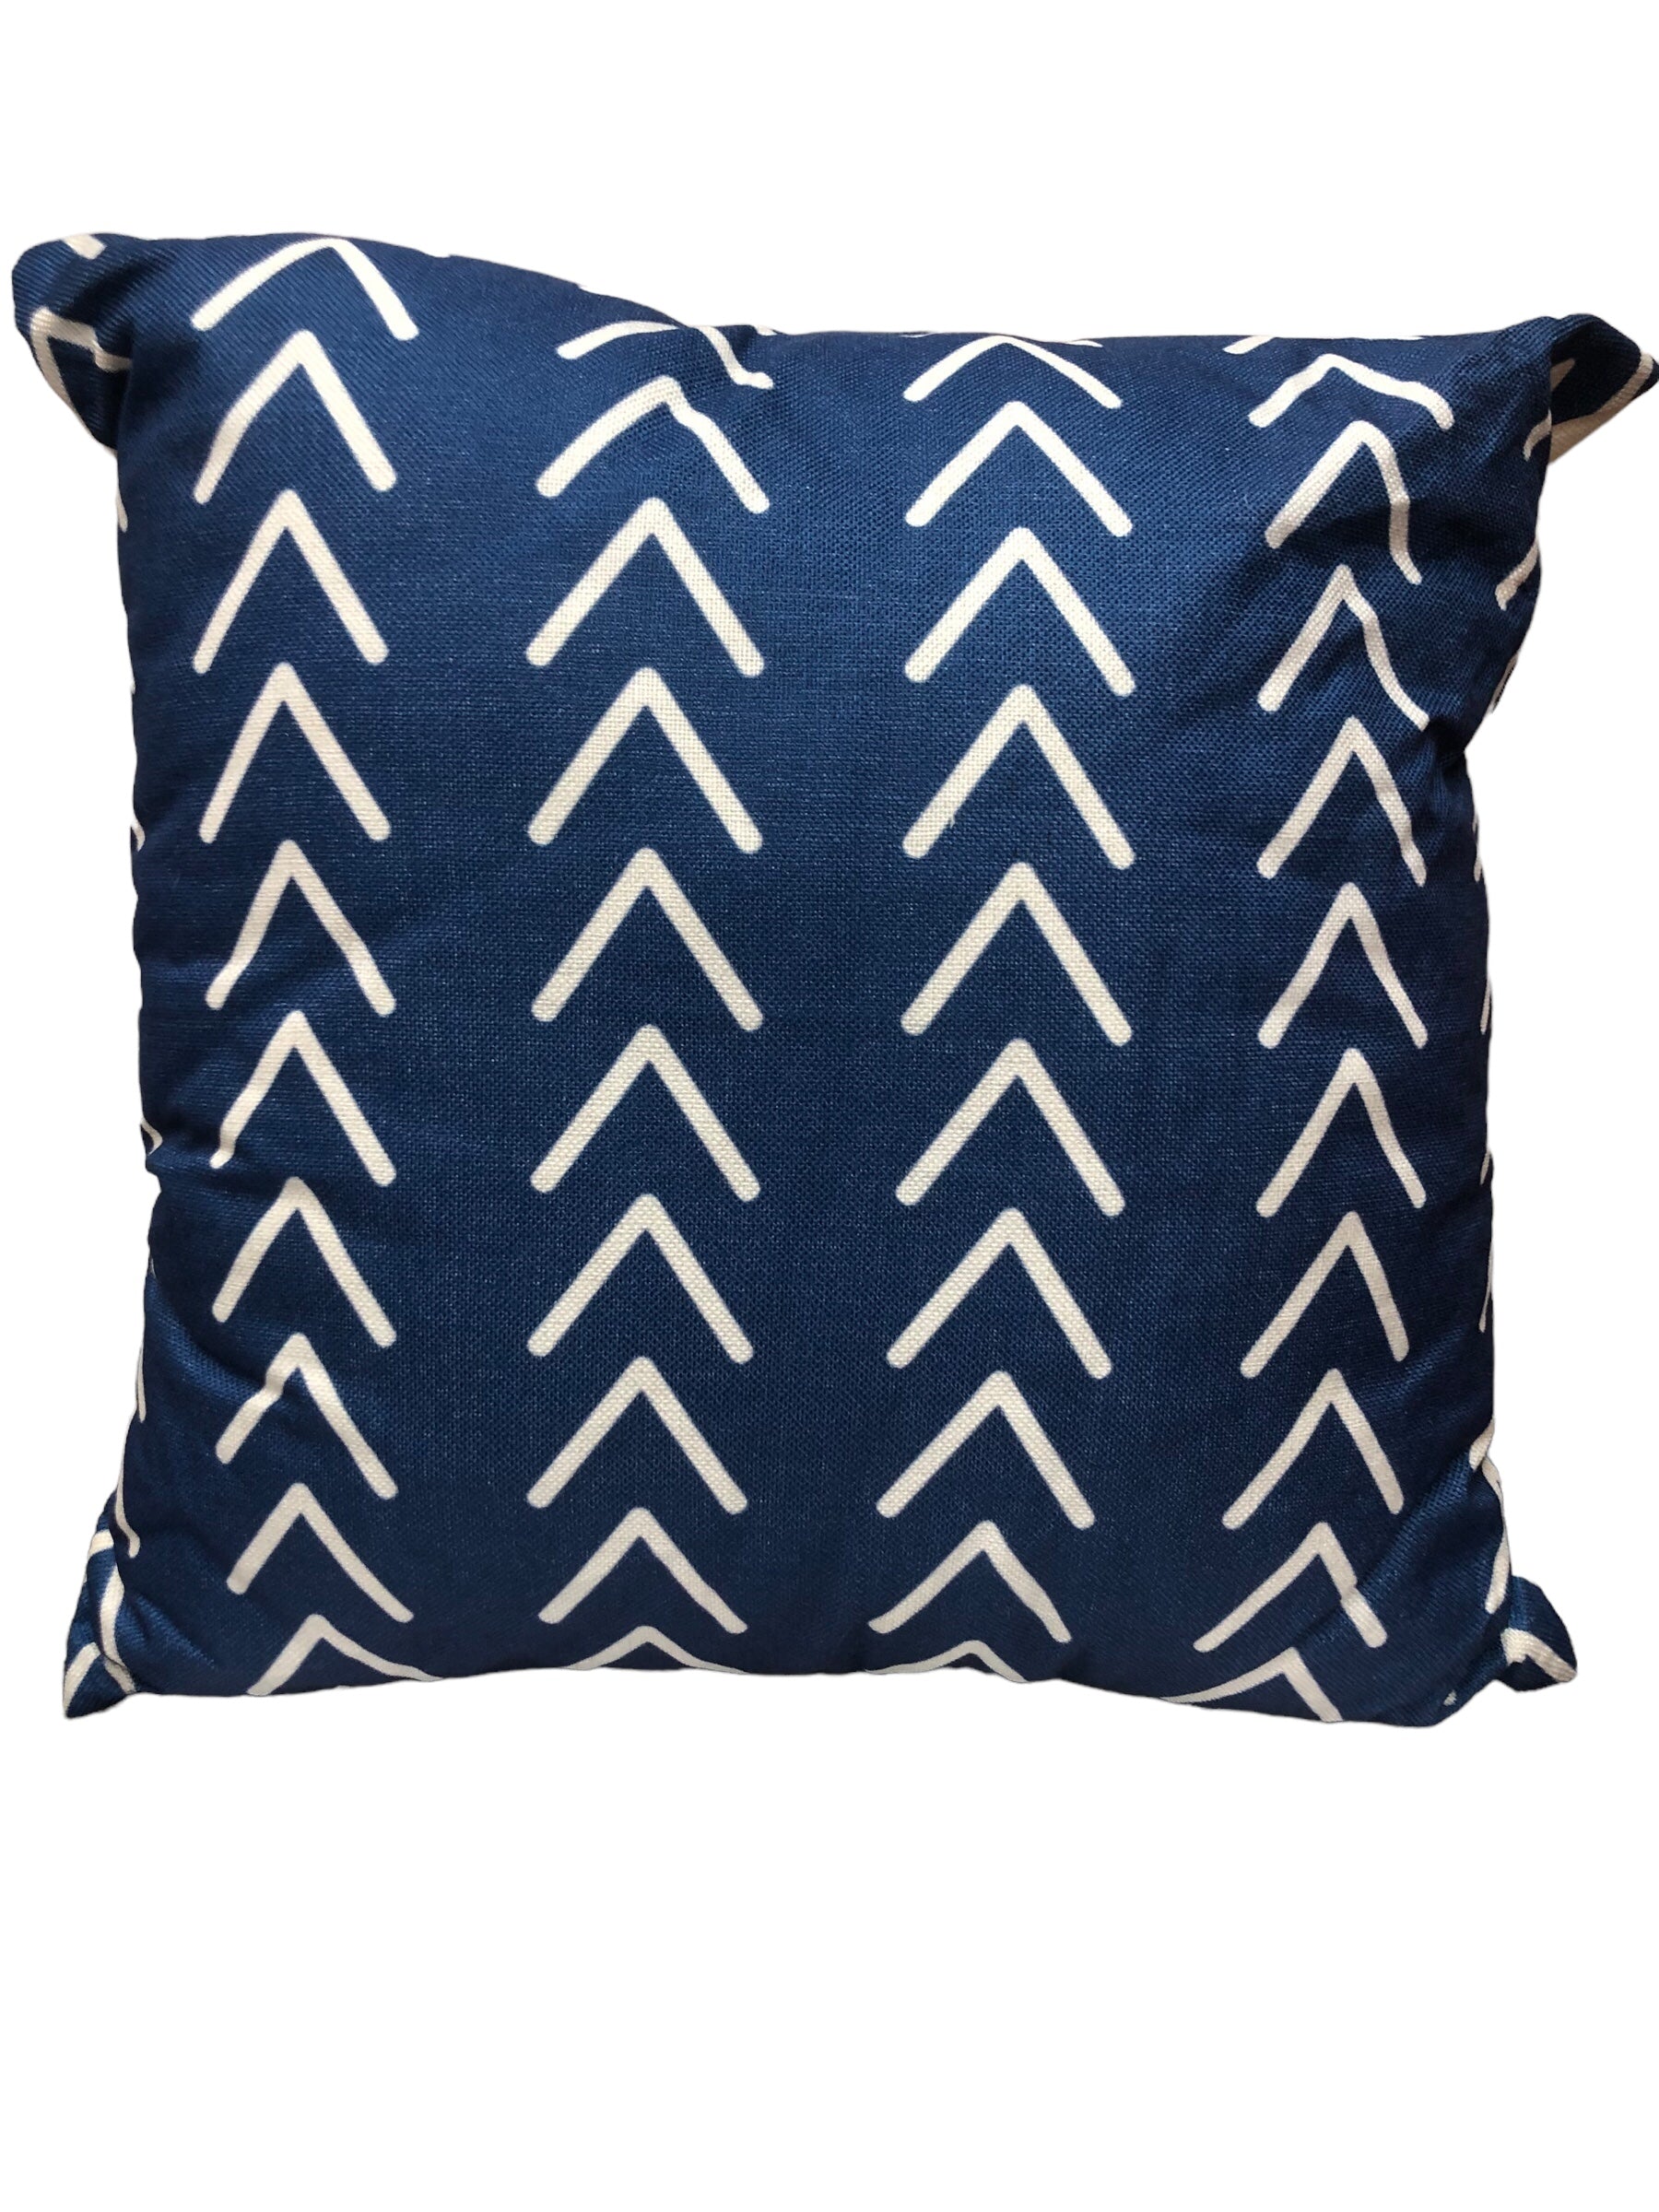 Cream and Bright Blue Pillow